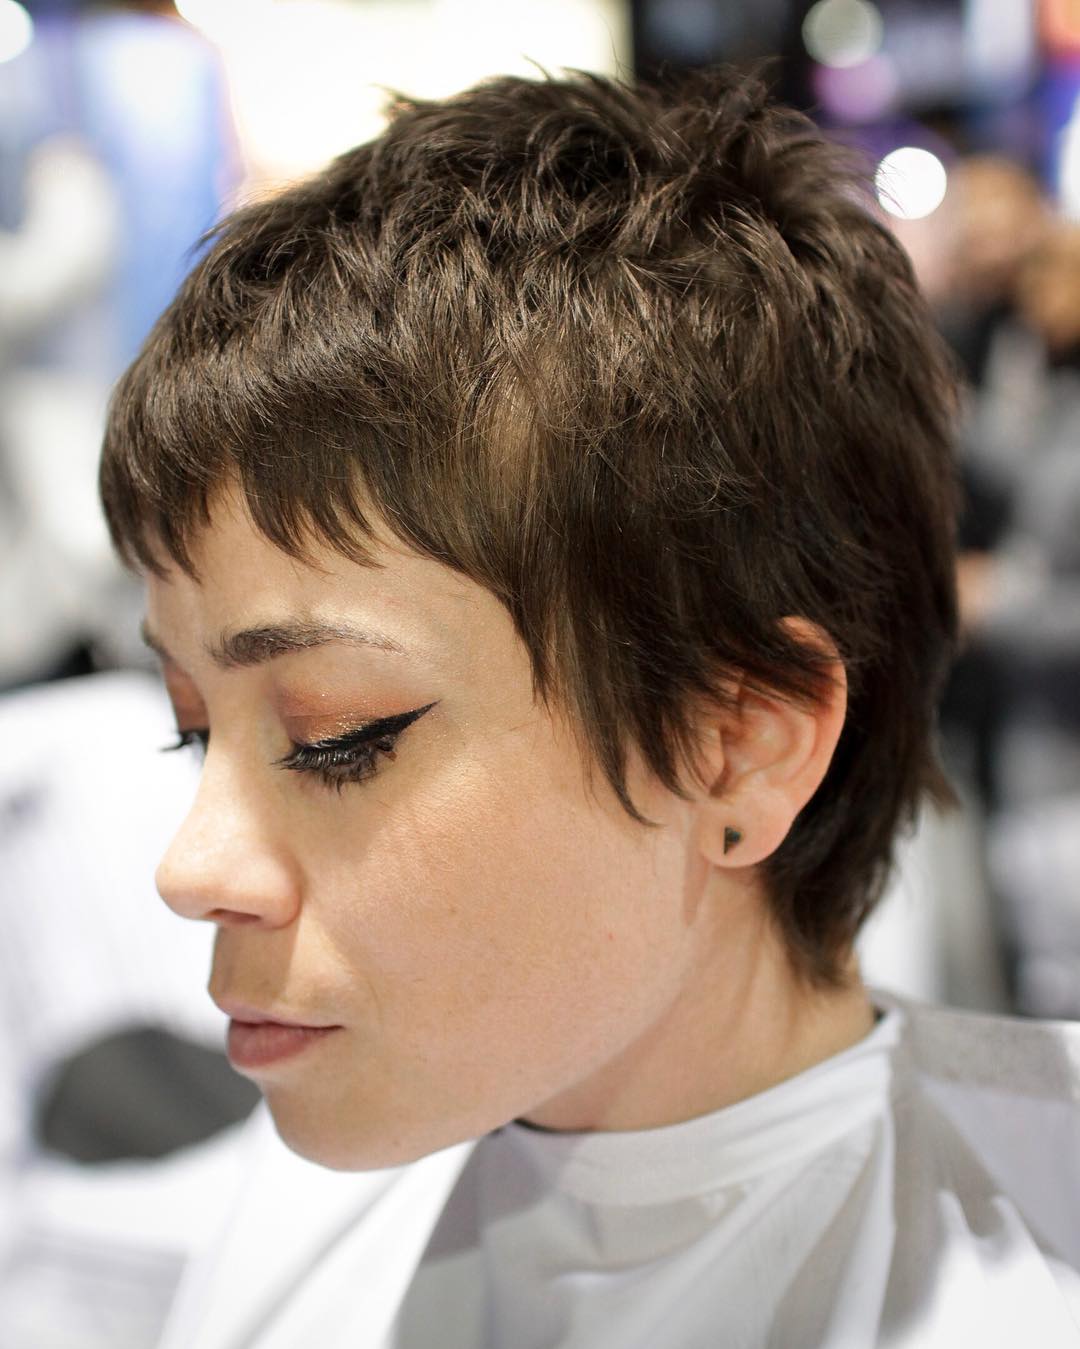 Lady with an ash brown pixie hair cut sits solemnly in a cape with dark eyeliner 